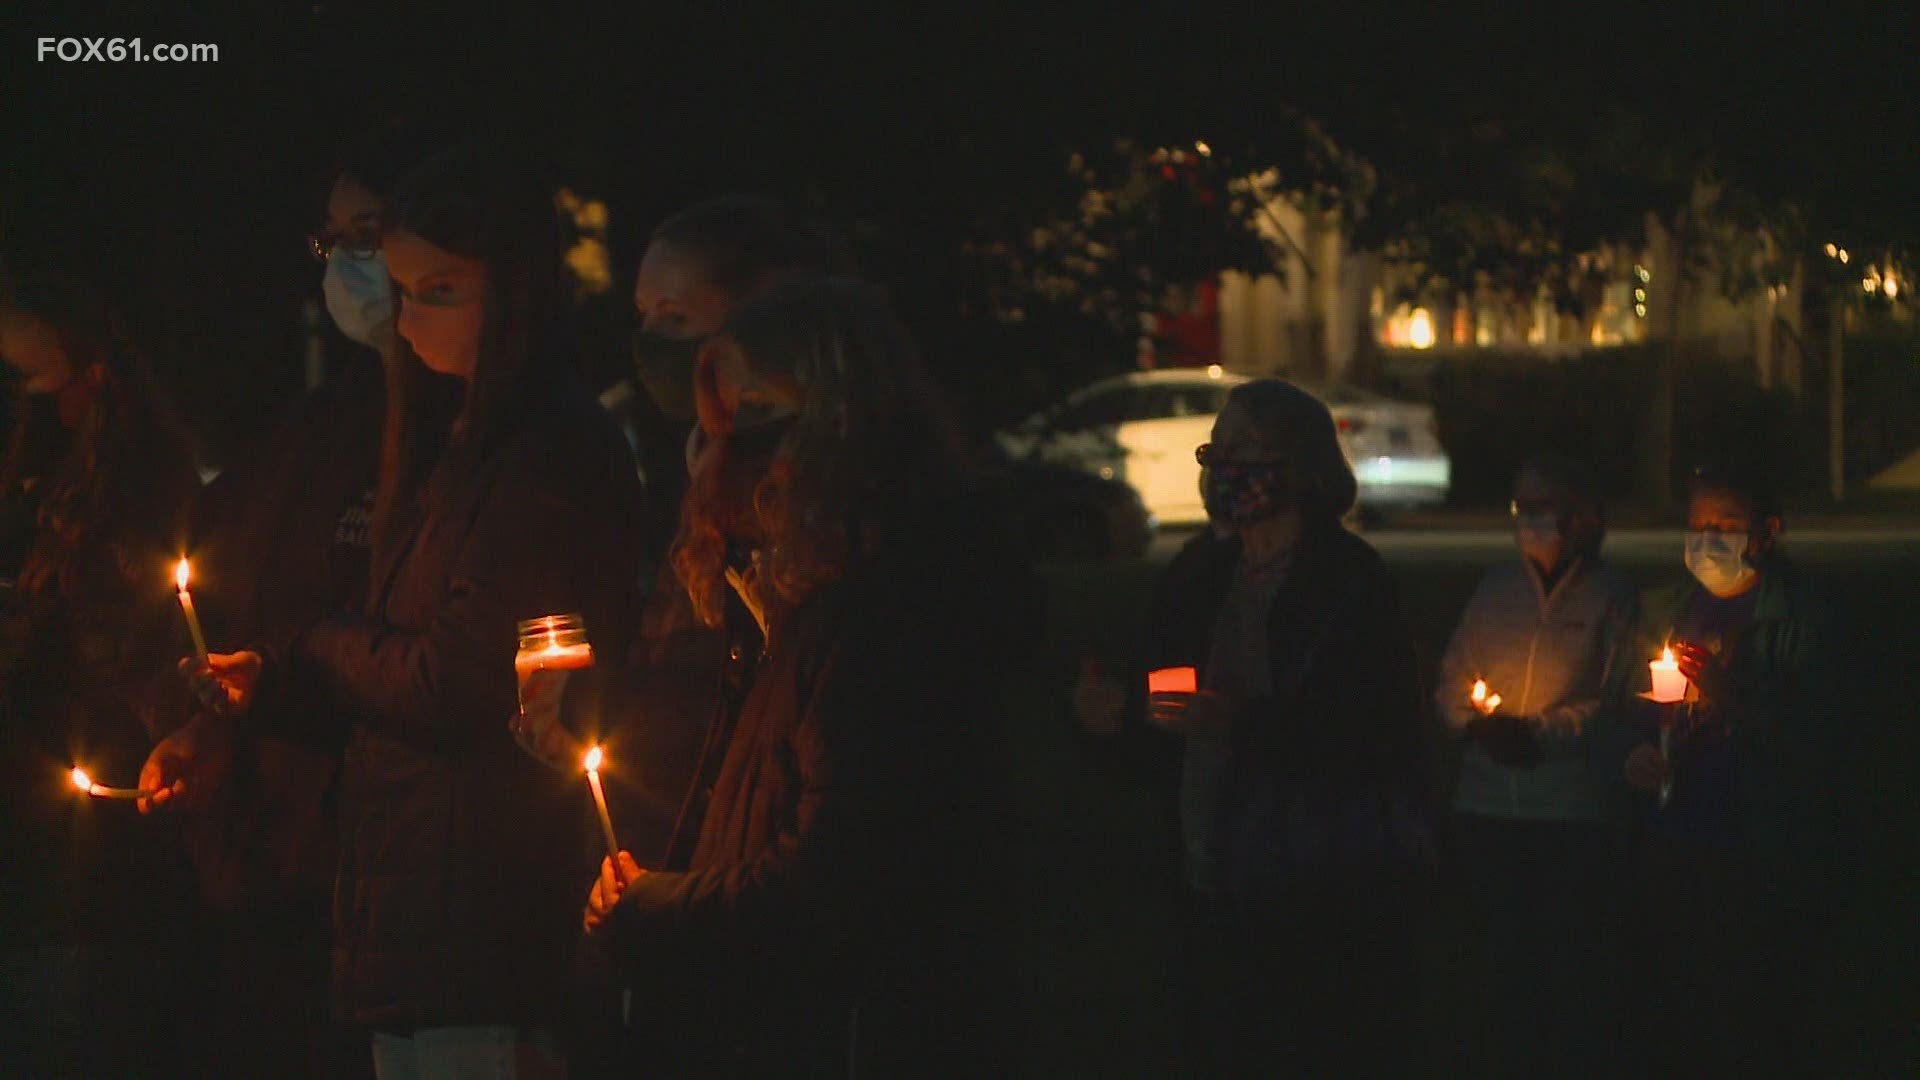 Dozens of people gathered on the Green Monday night to honor her life and legacy.